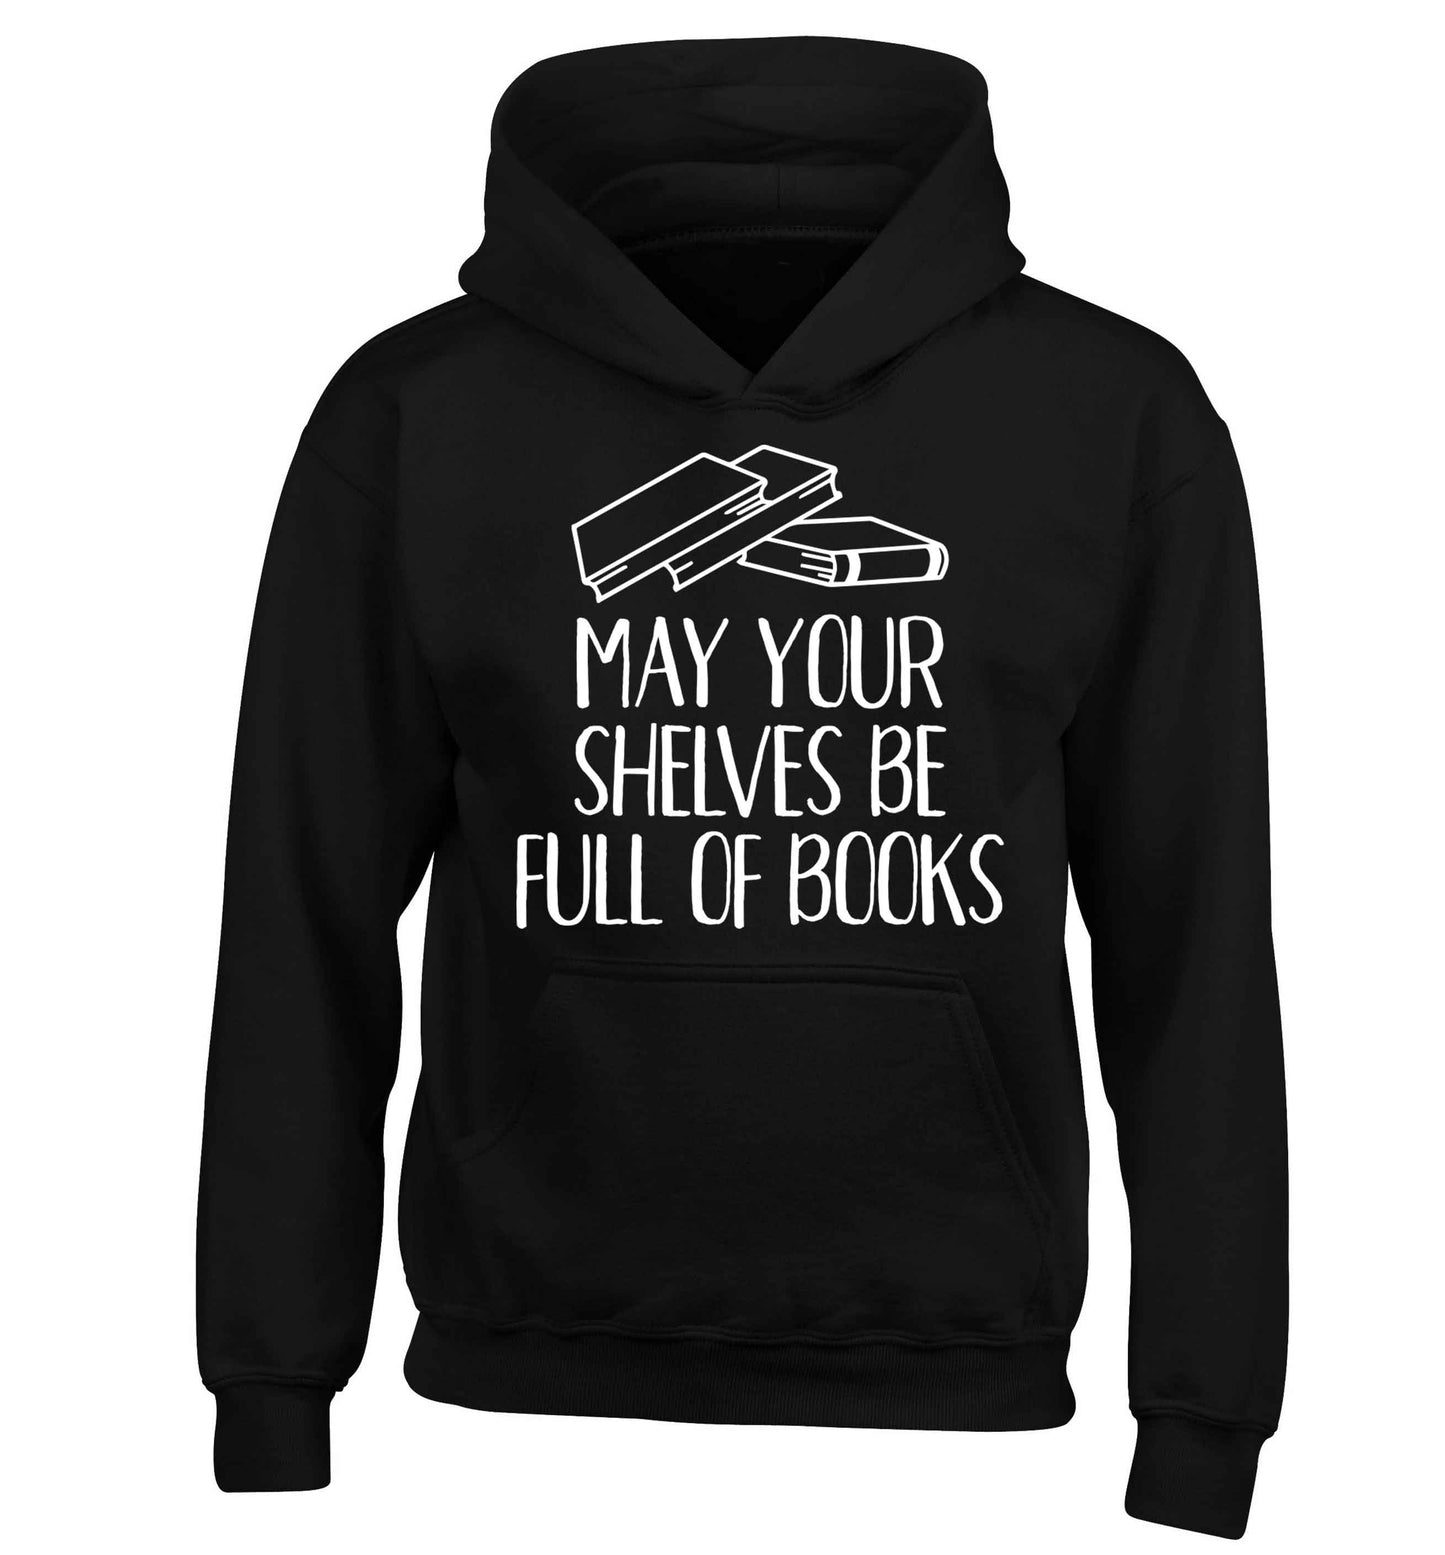 May your shelves be full of books children's black hoodie 12-13 Years